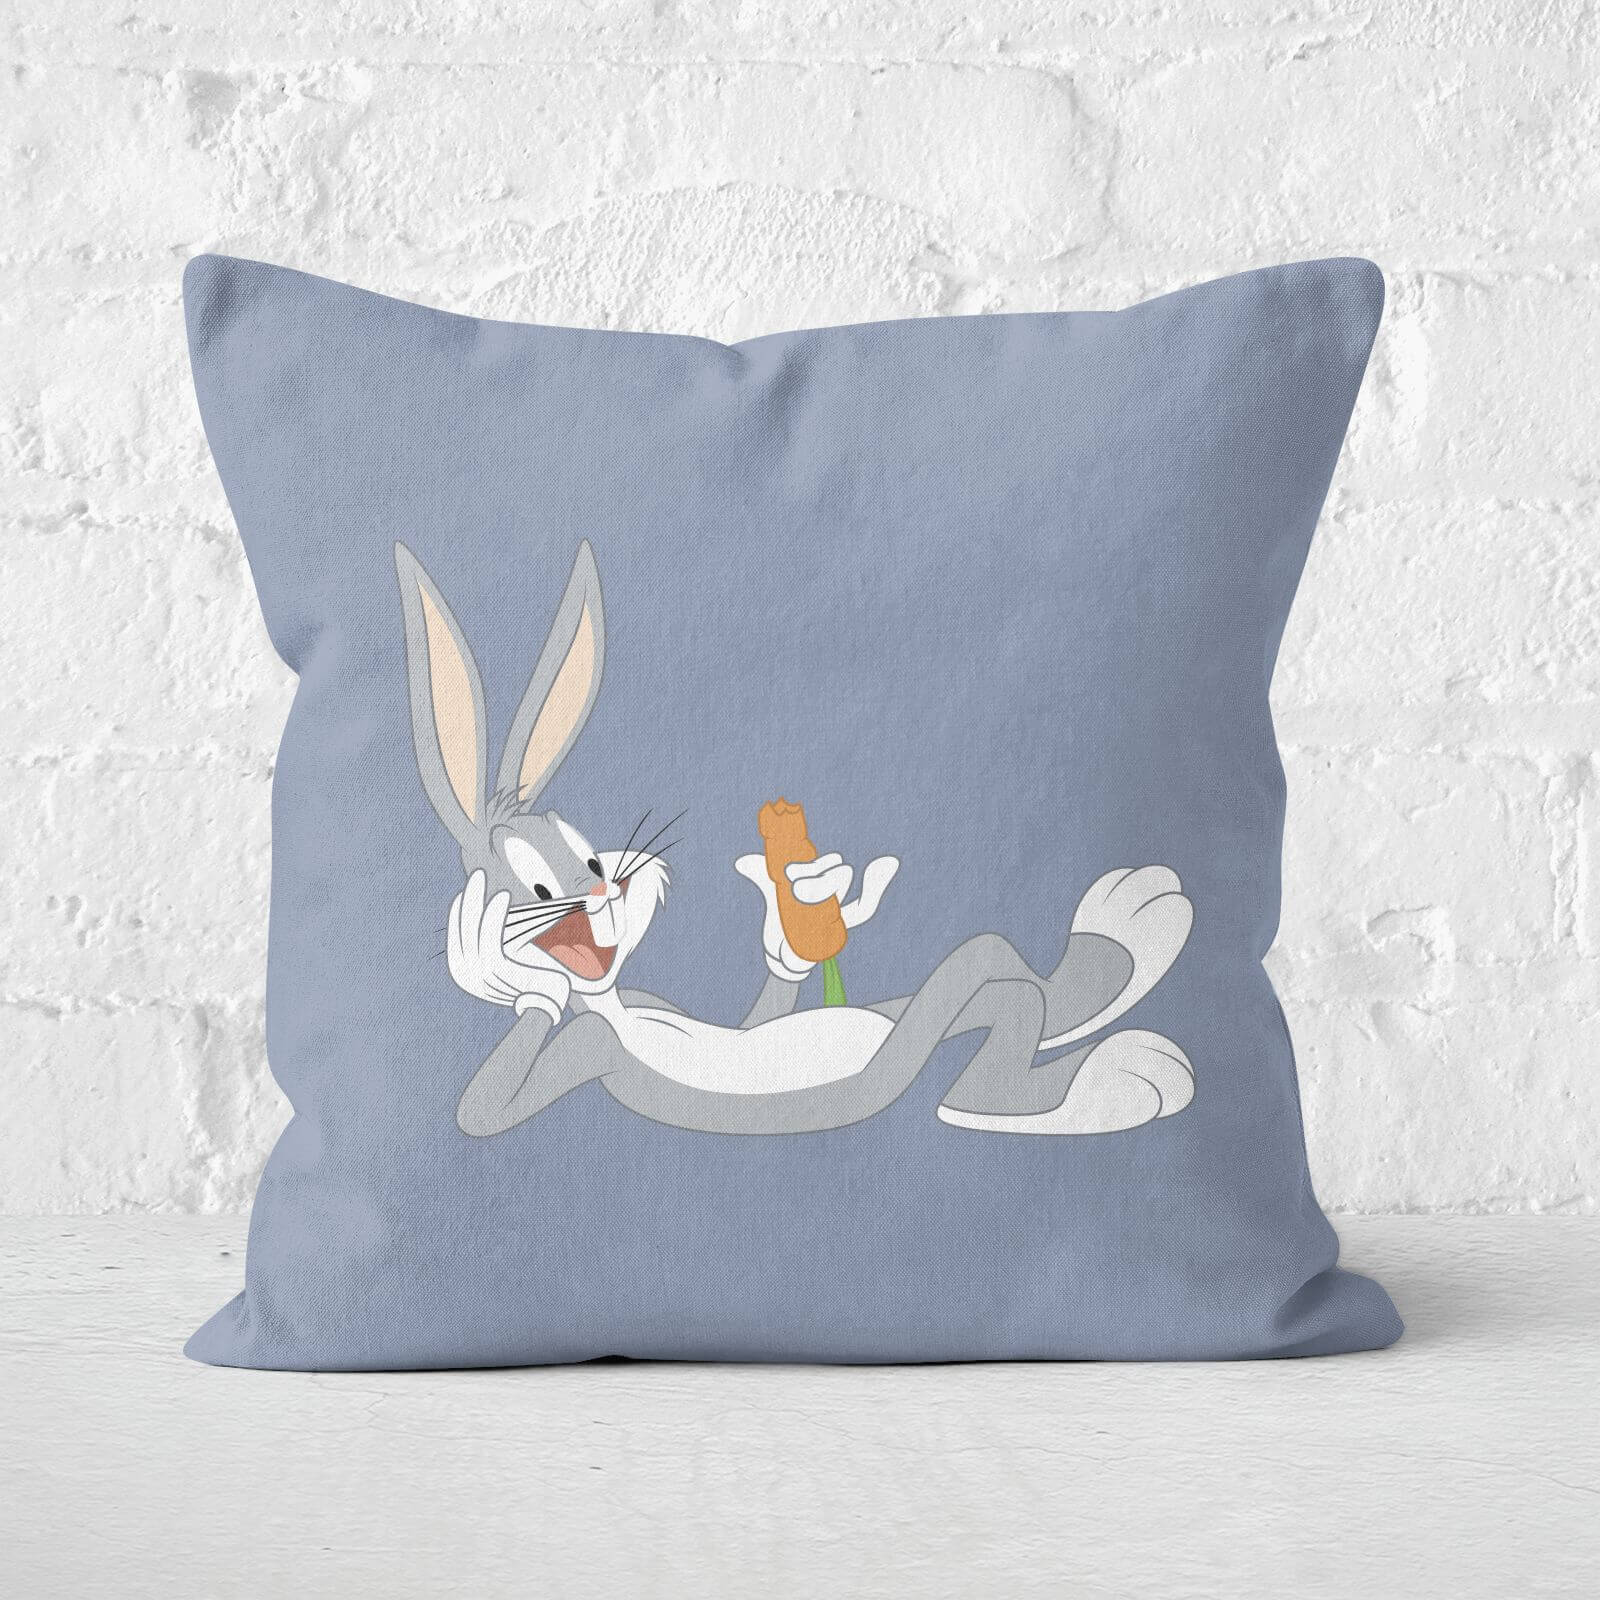 Bugs Bunny Square Cushion - 50x50cm - Soft Touch